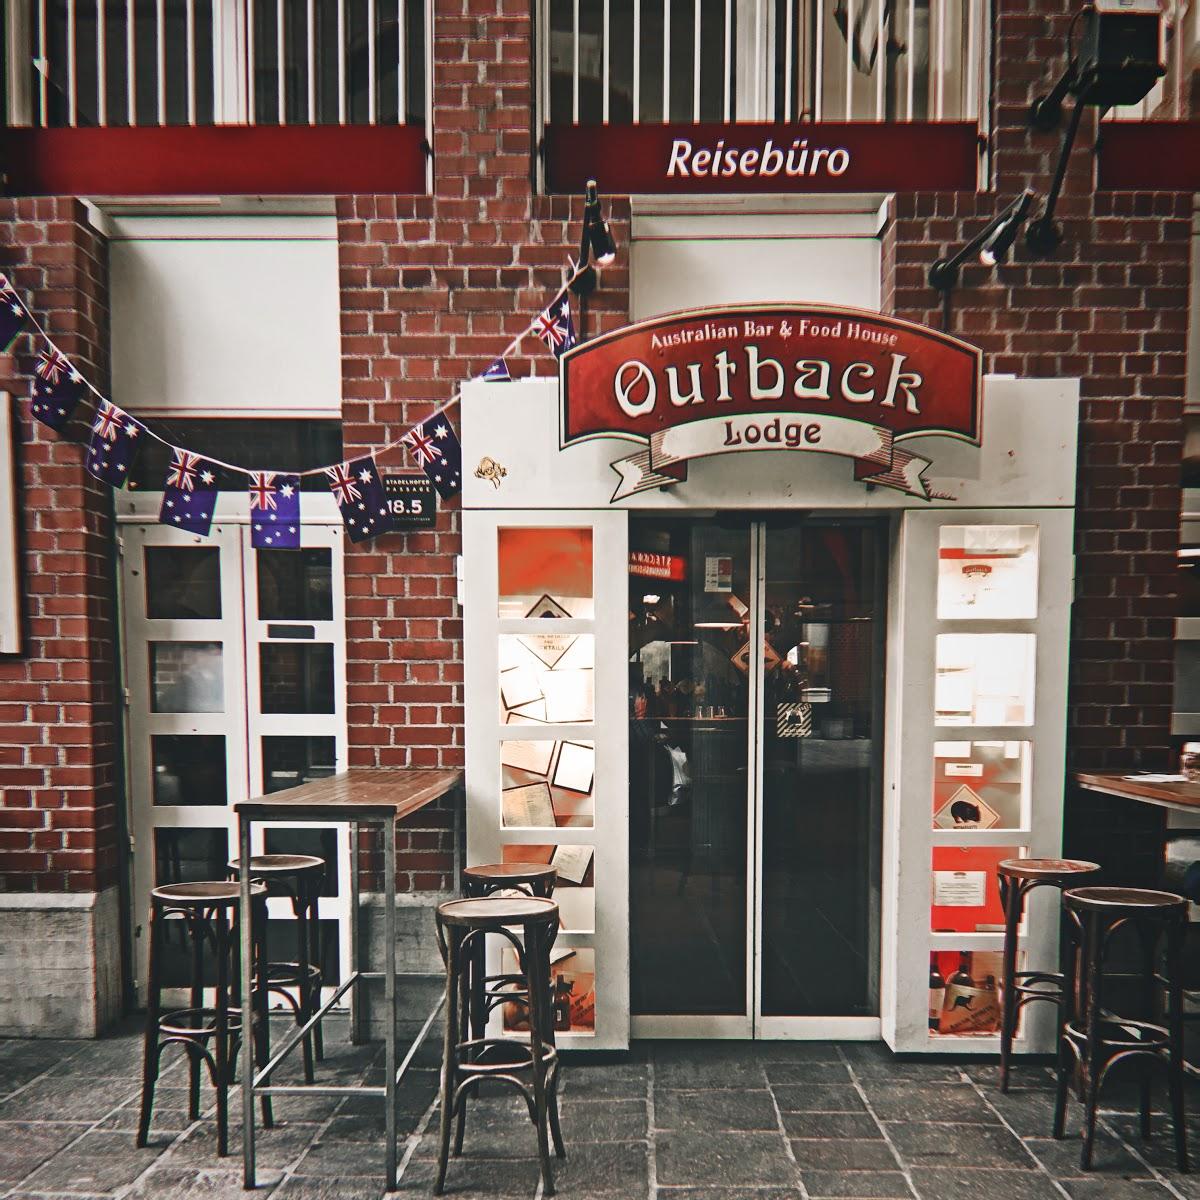 Restaurant "Outback Lodge" in Zürich